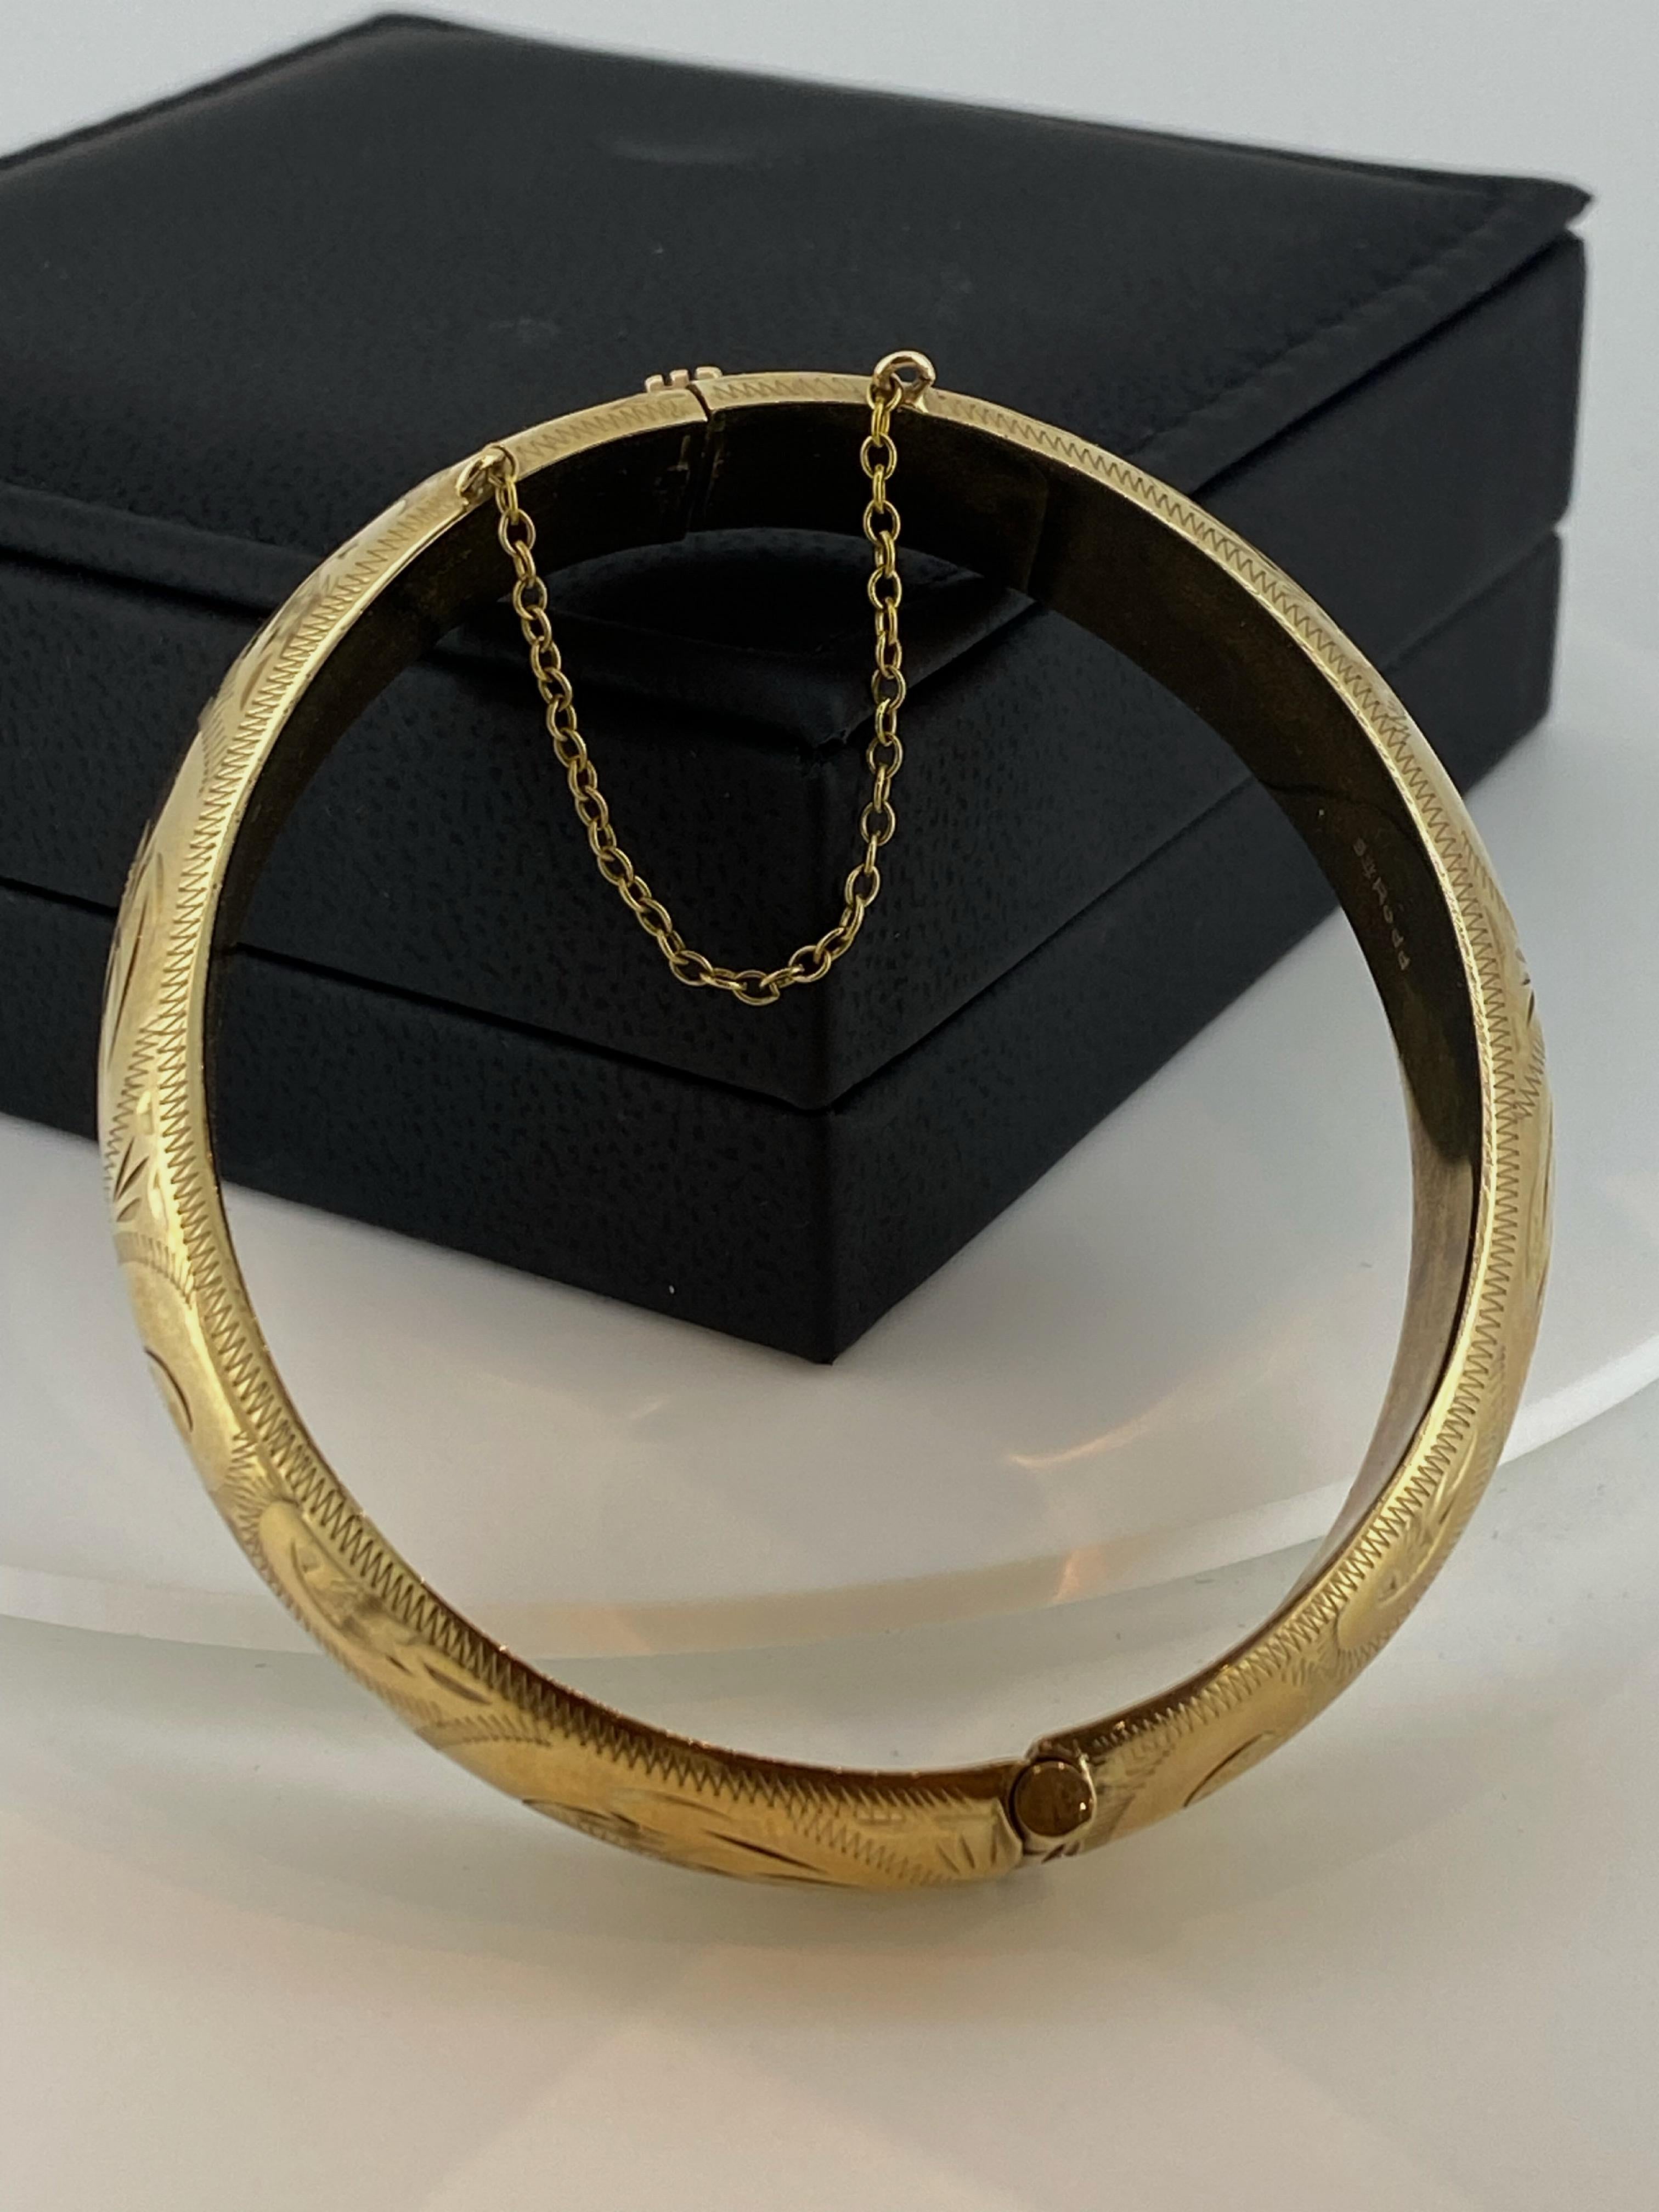 9K Yellow Gold Retro 1950's Finely Engraved Hinged Bangle. Circumference: 21cm. For Sale 2